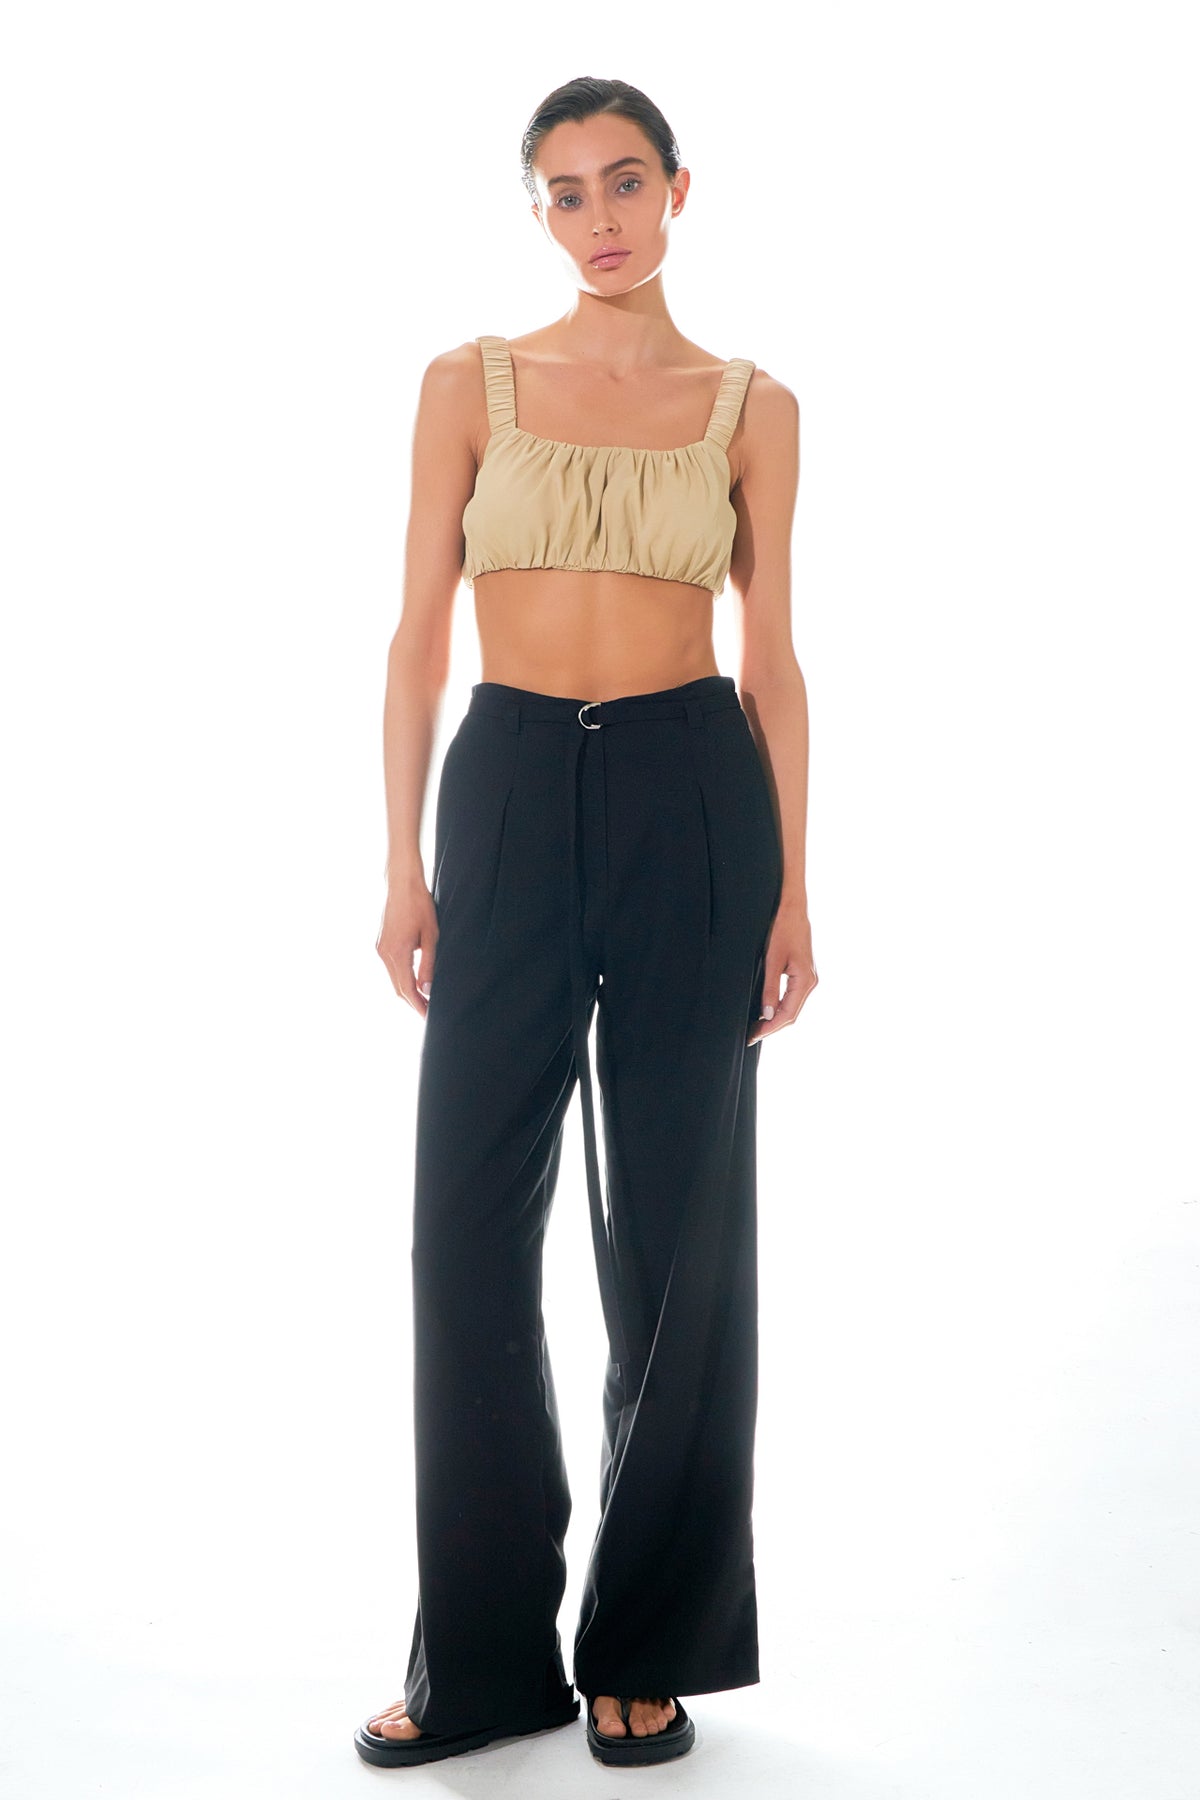 GREY LAB - Pleated Wide Pants with Belt - PANTS available at Objectrare